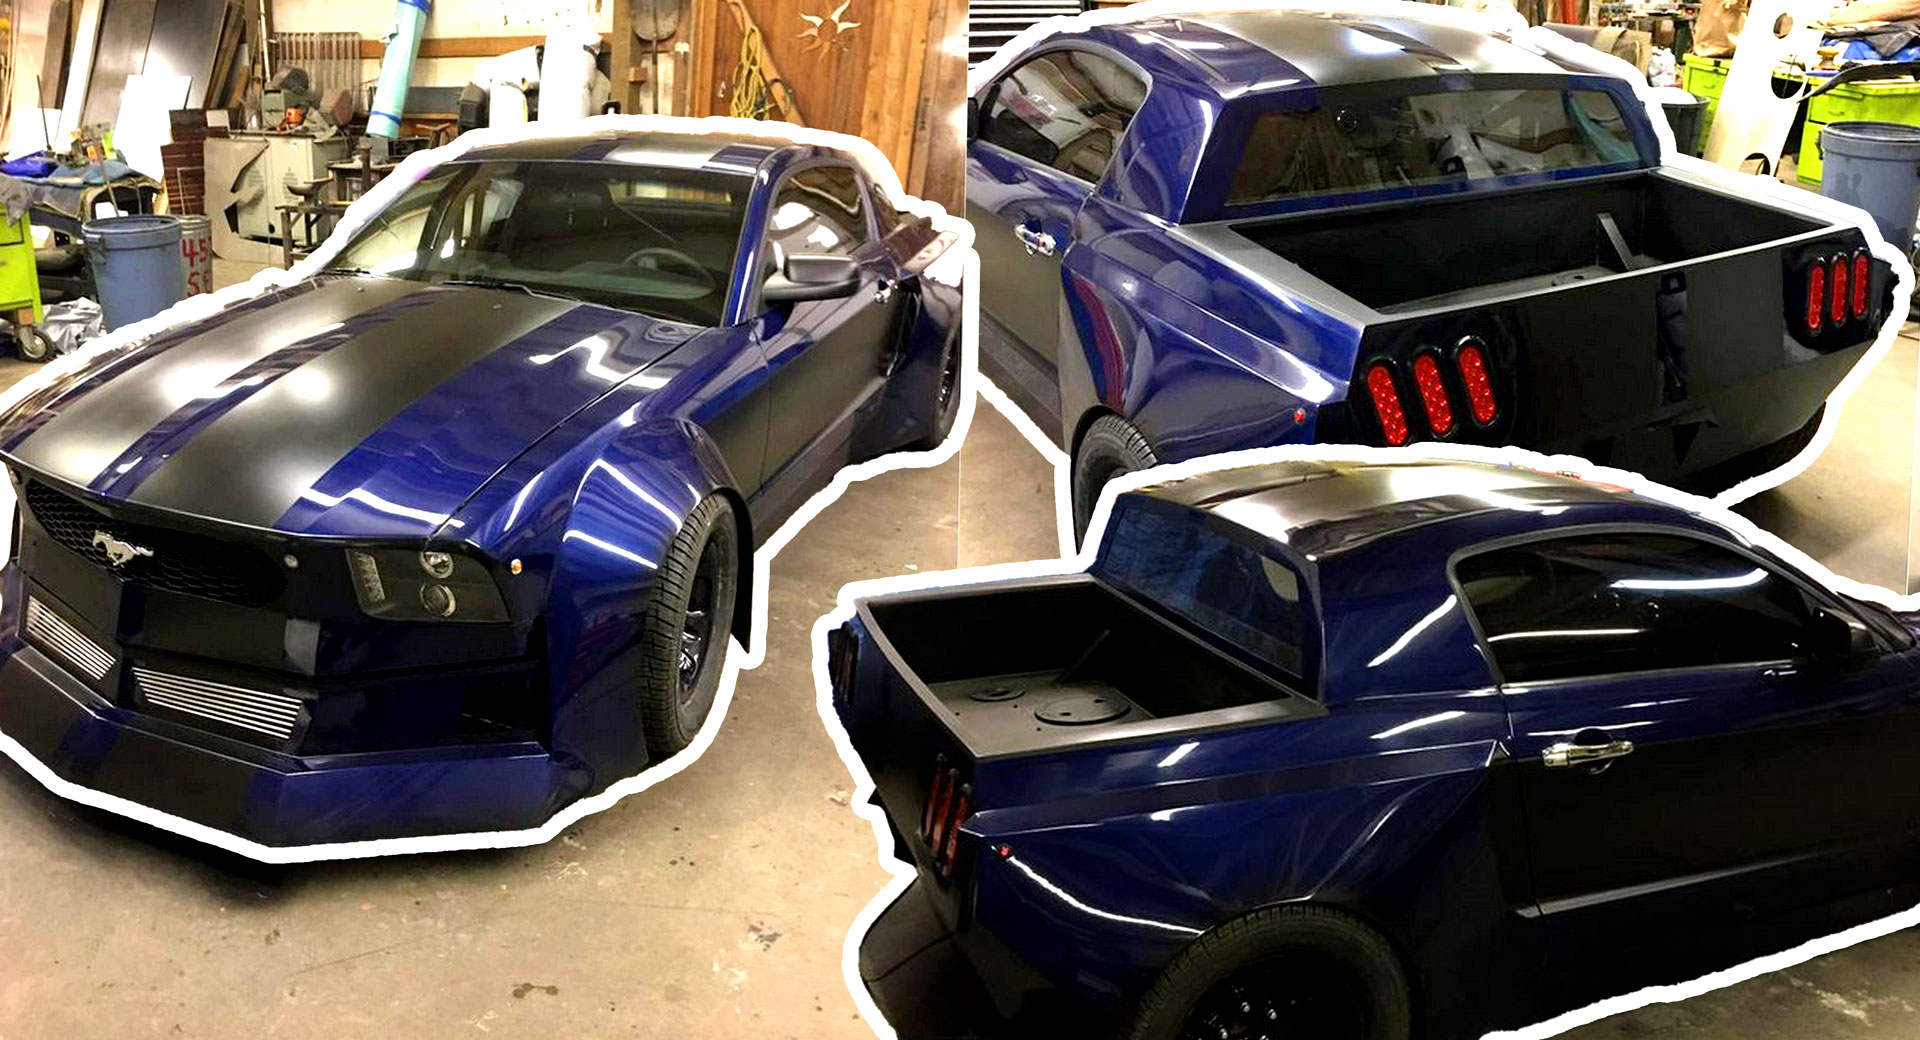 For $10K Could This Ford Mustang Pickup Conversion Fulfill Your